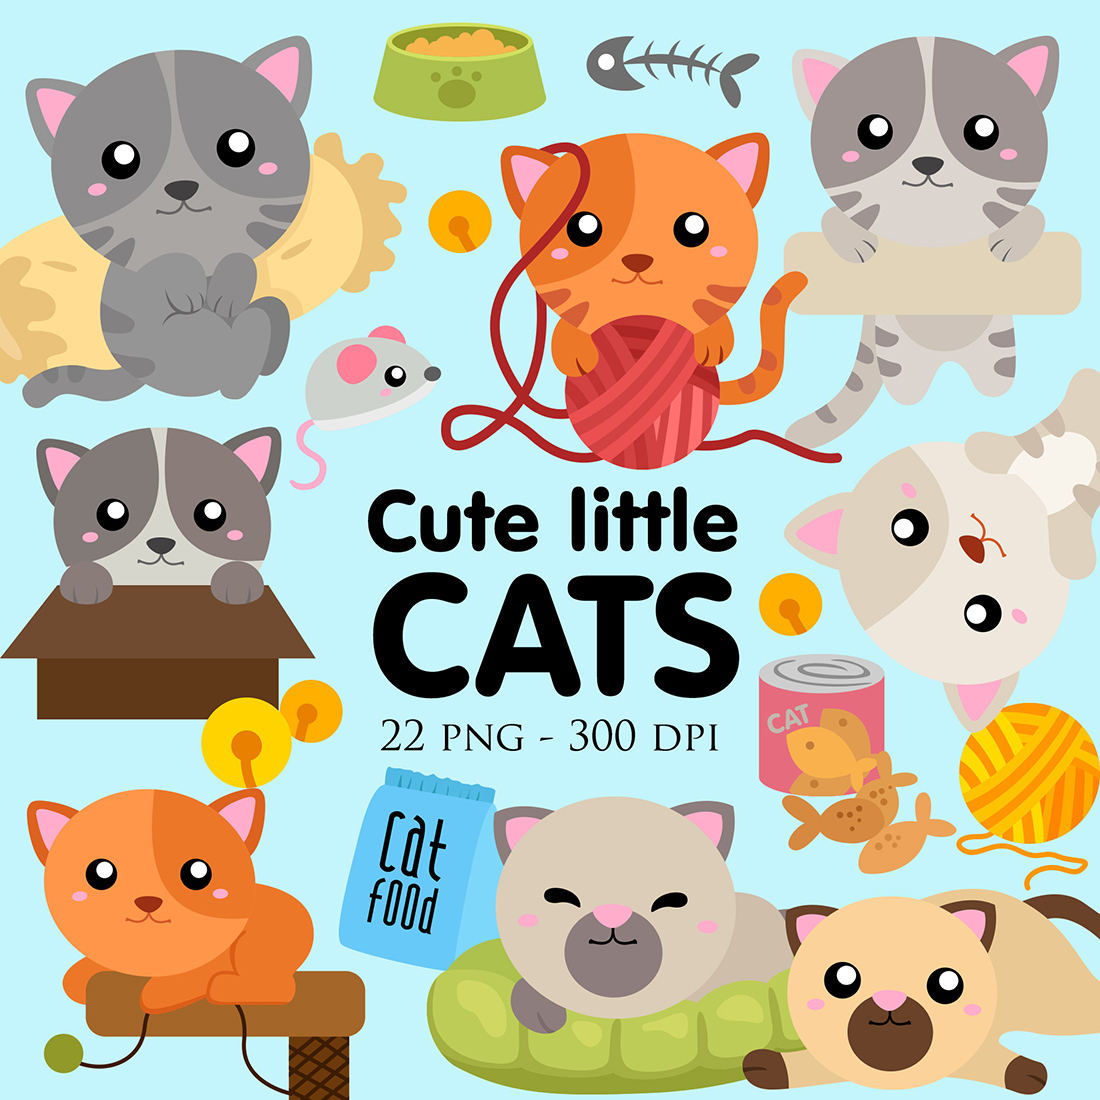 Cute Cats Animal Vector Clipart Illustrations cover image.